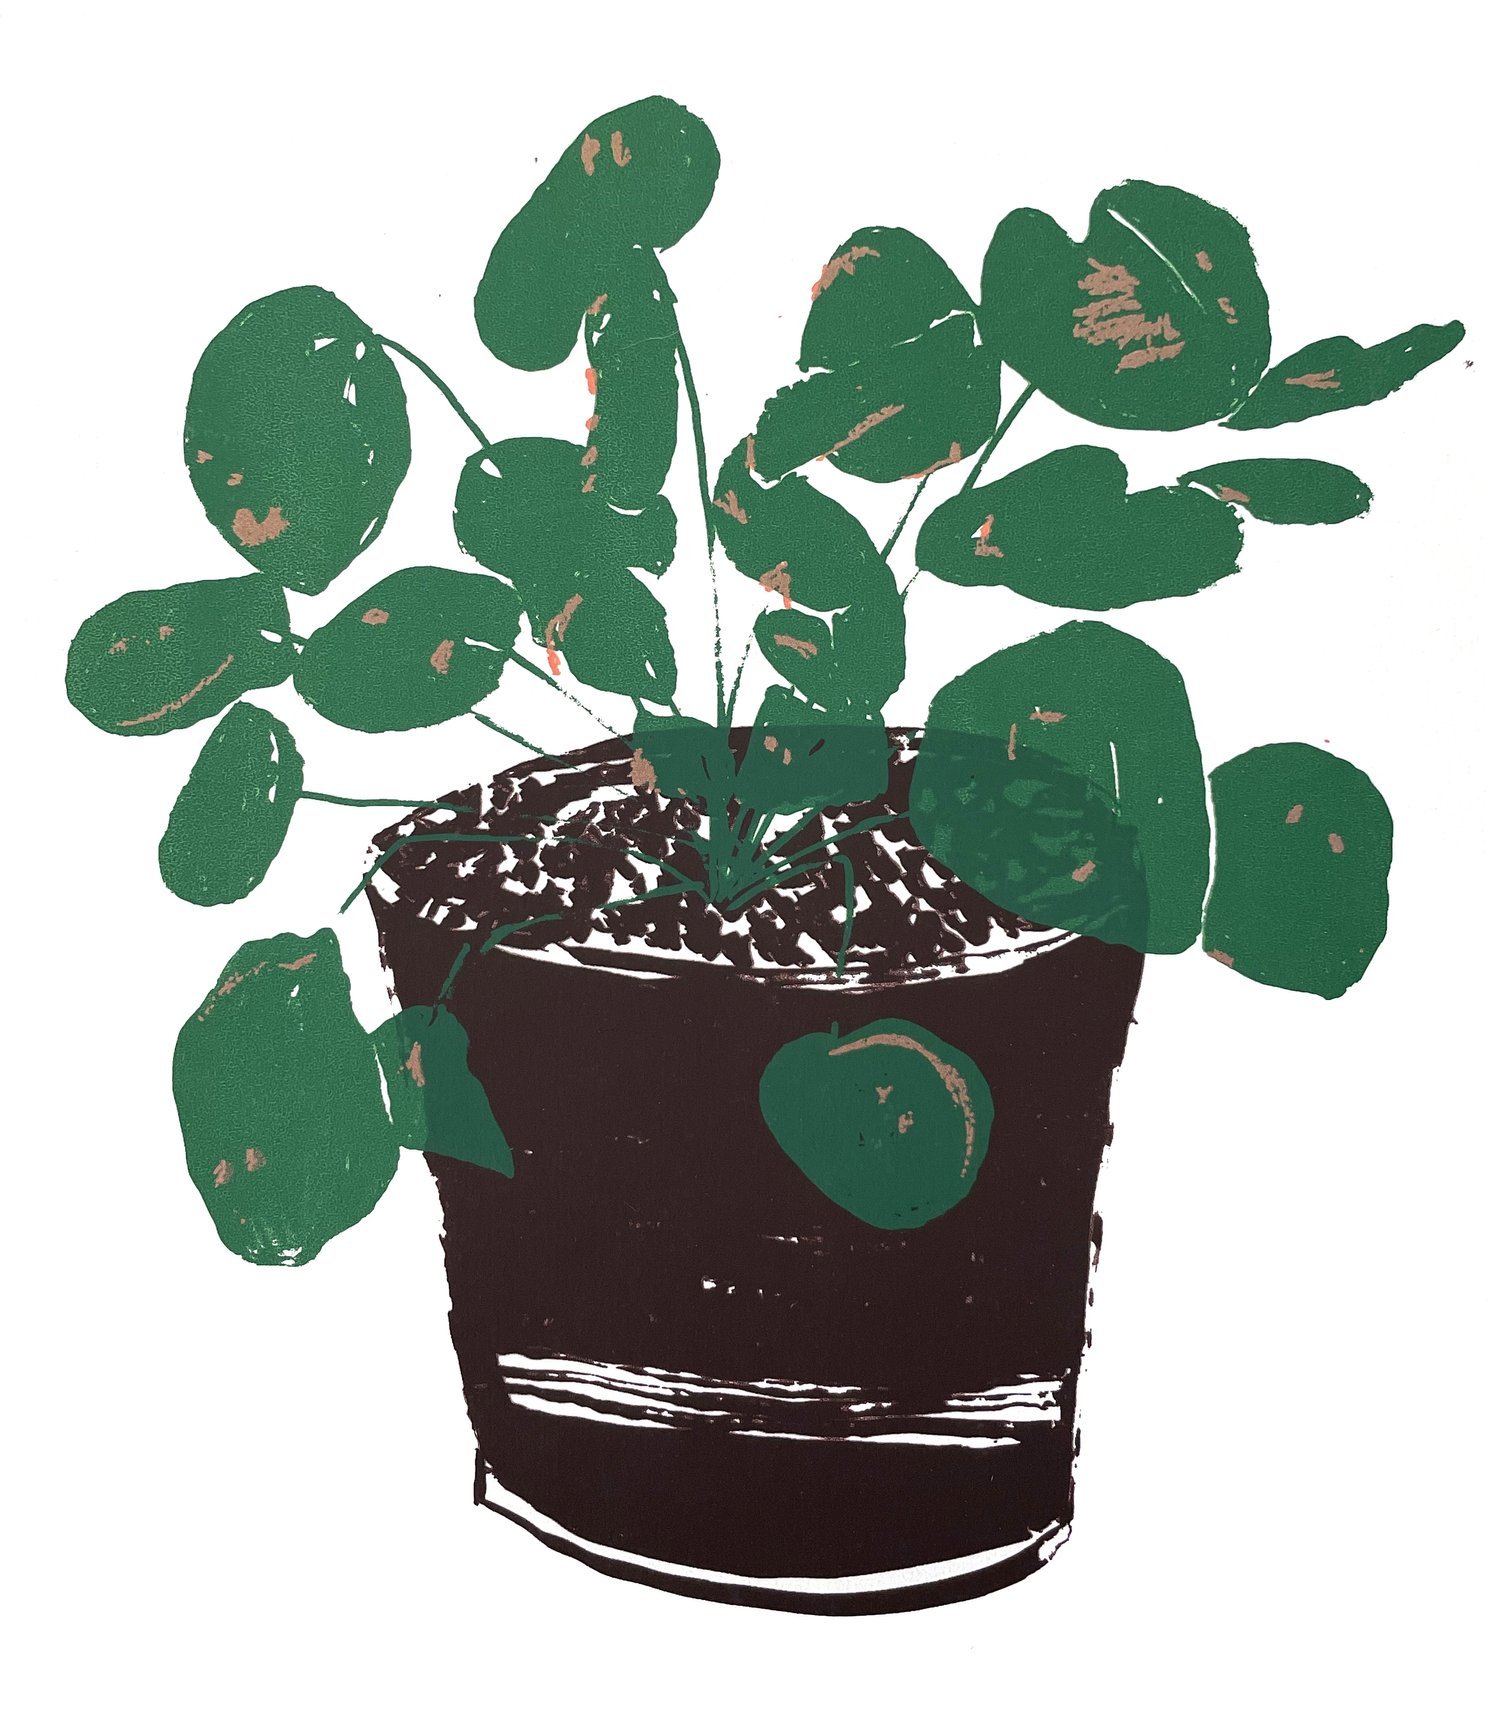   WELCOME HOME - PILEA  Silkscreen   - BUY ME -   - CLICK TO VIEW GINKGO COLLECTION -    